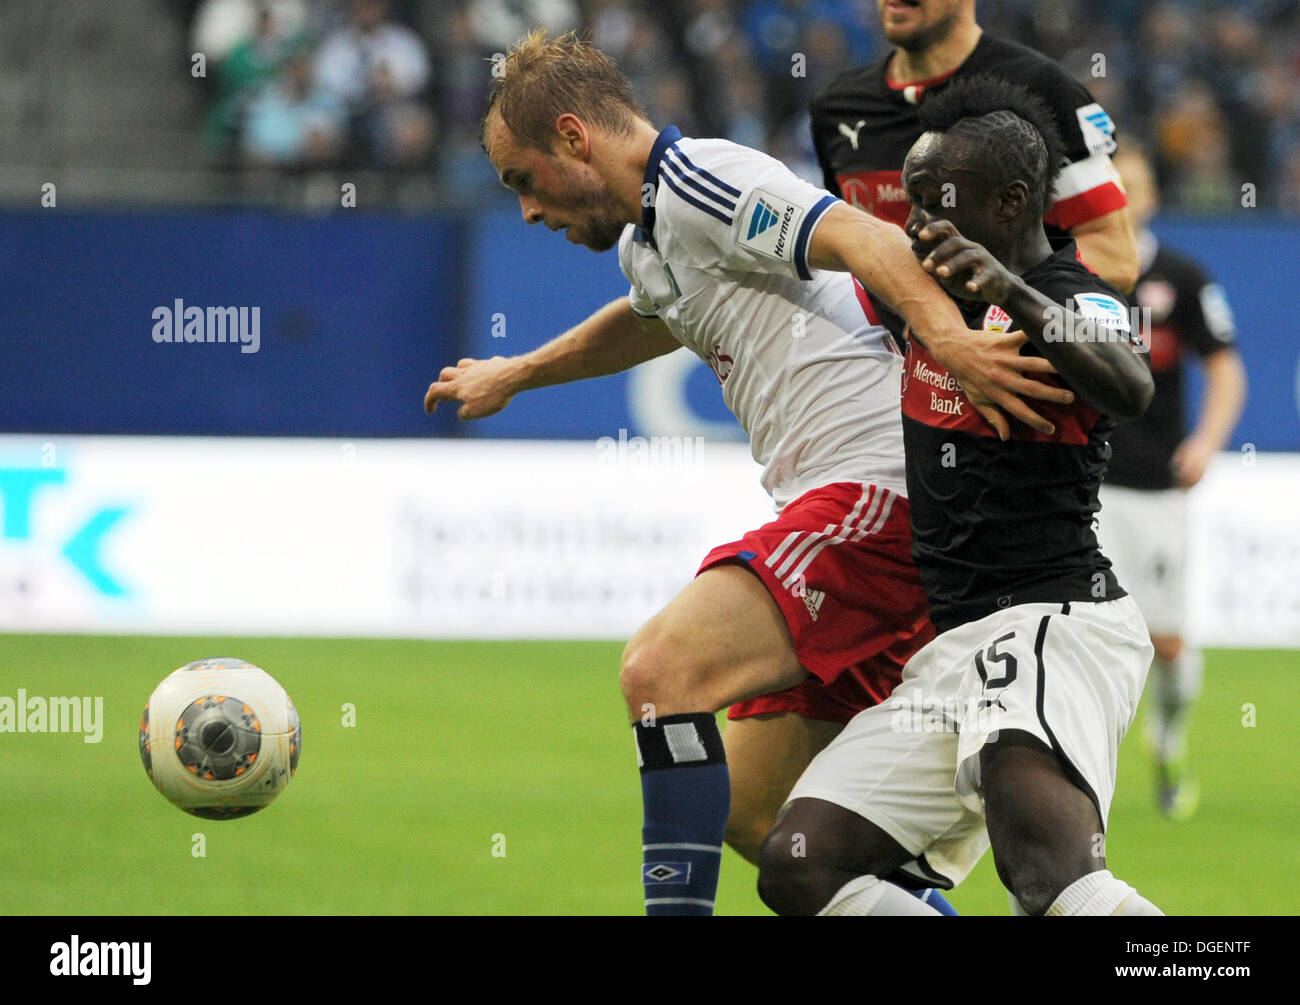 Hamburg, Germany. 20th Oct, 2013. Hamburg's Maximilian Beister (L) vies for the ball with Stuttgart's Arthur Boka (R) next to Stuttgart's Christian Gentner during the German Bundesliga soccer match between Hamburger SV and VfB Stuttgart at the Imtech Arena in Hamburg, Germany, 20 October 2013. Photo: ANGELIKA WARMUTH (ATTENTION: Due to the accreditation guidelines, the DFL only permits the publication and utilisation of up to 15 pictures per match on the internet and in online media during the match.)/dpa/Alamy Live News Stock Photo